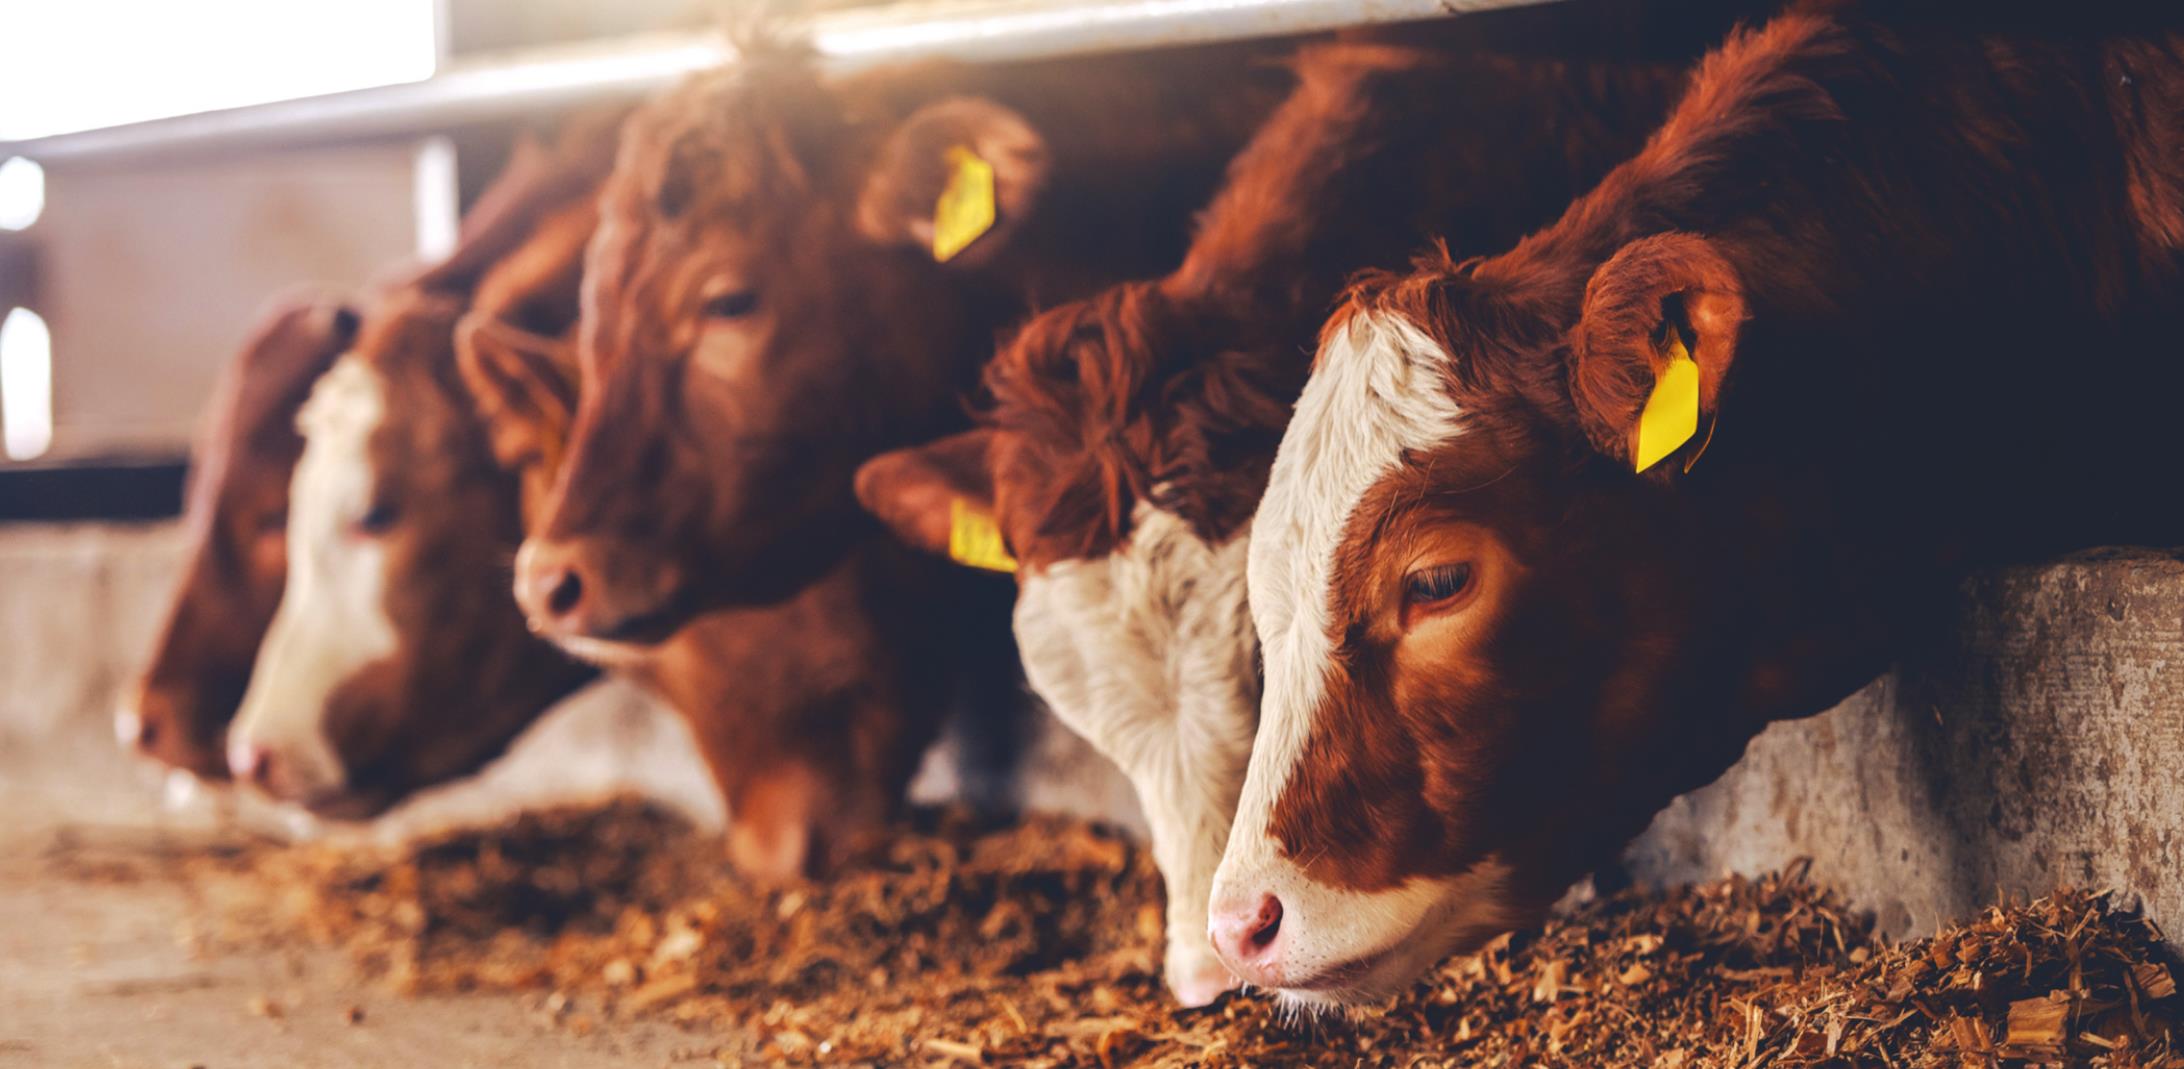 Provided Cattle prices in the United States have been dropping but the cost of meat continues to rise. Local farmer Lawrence Sawatzky said the problem has to do with a lack of small, local meat processing companies in the marketplace.